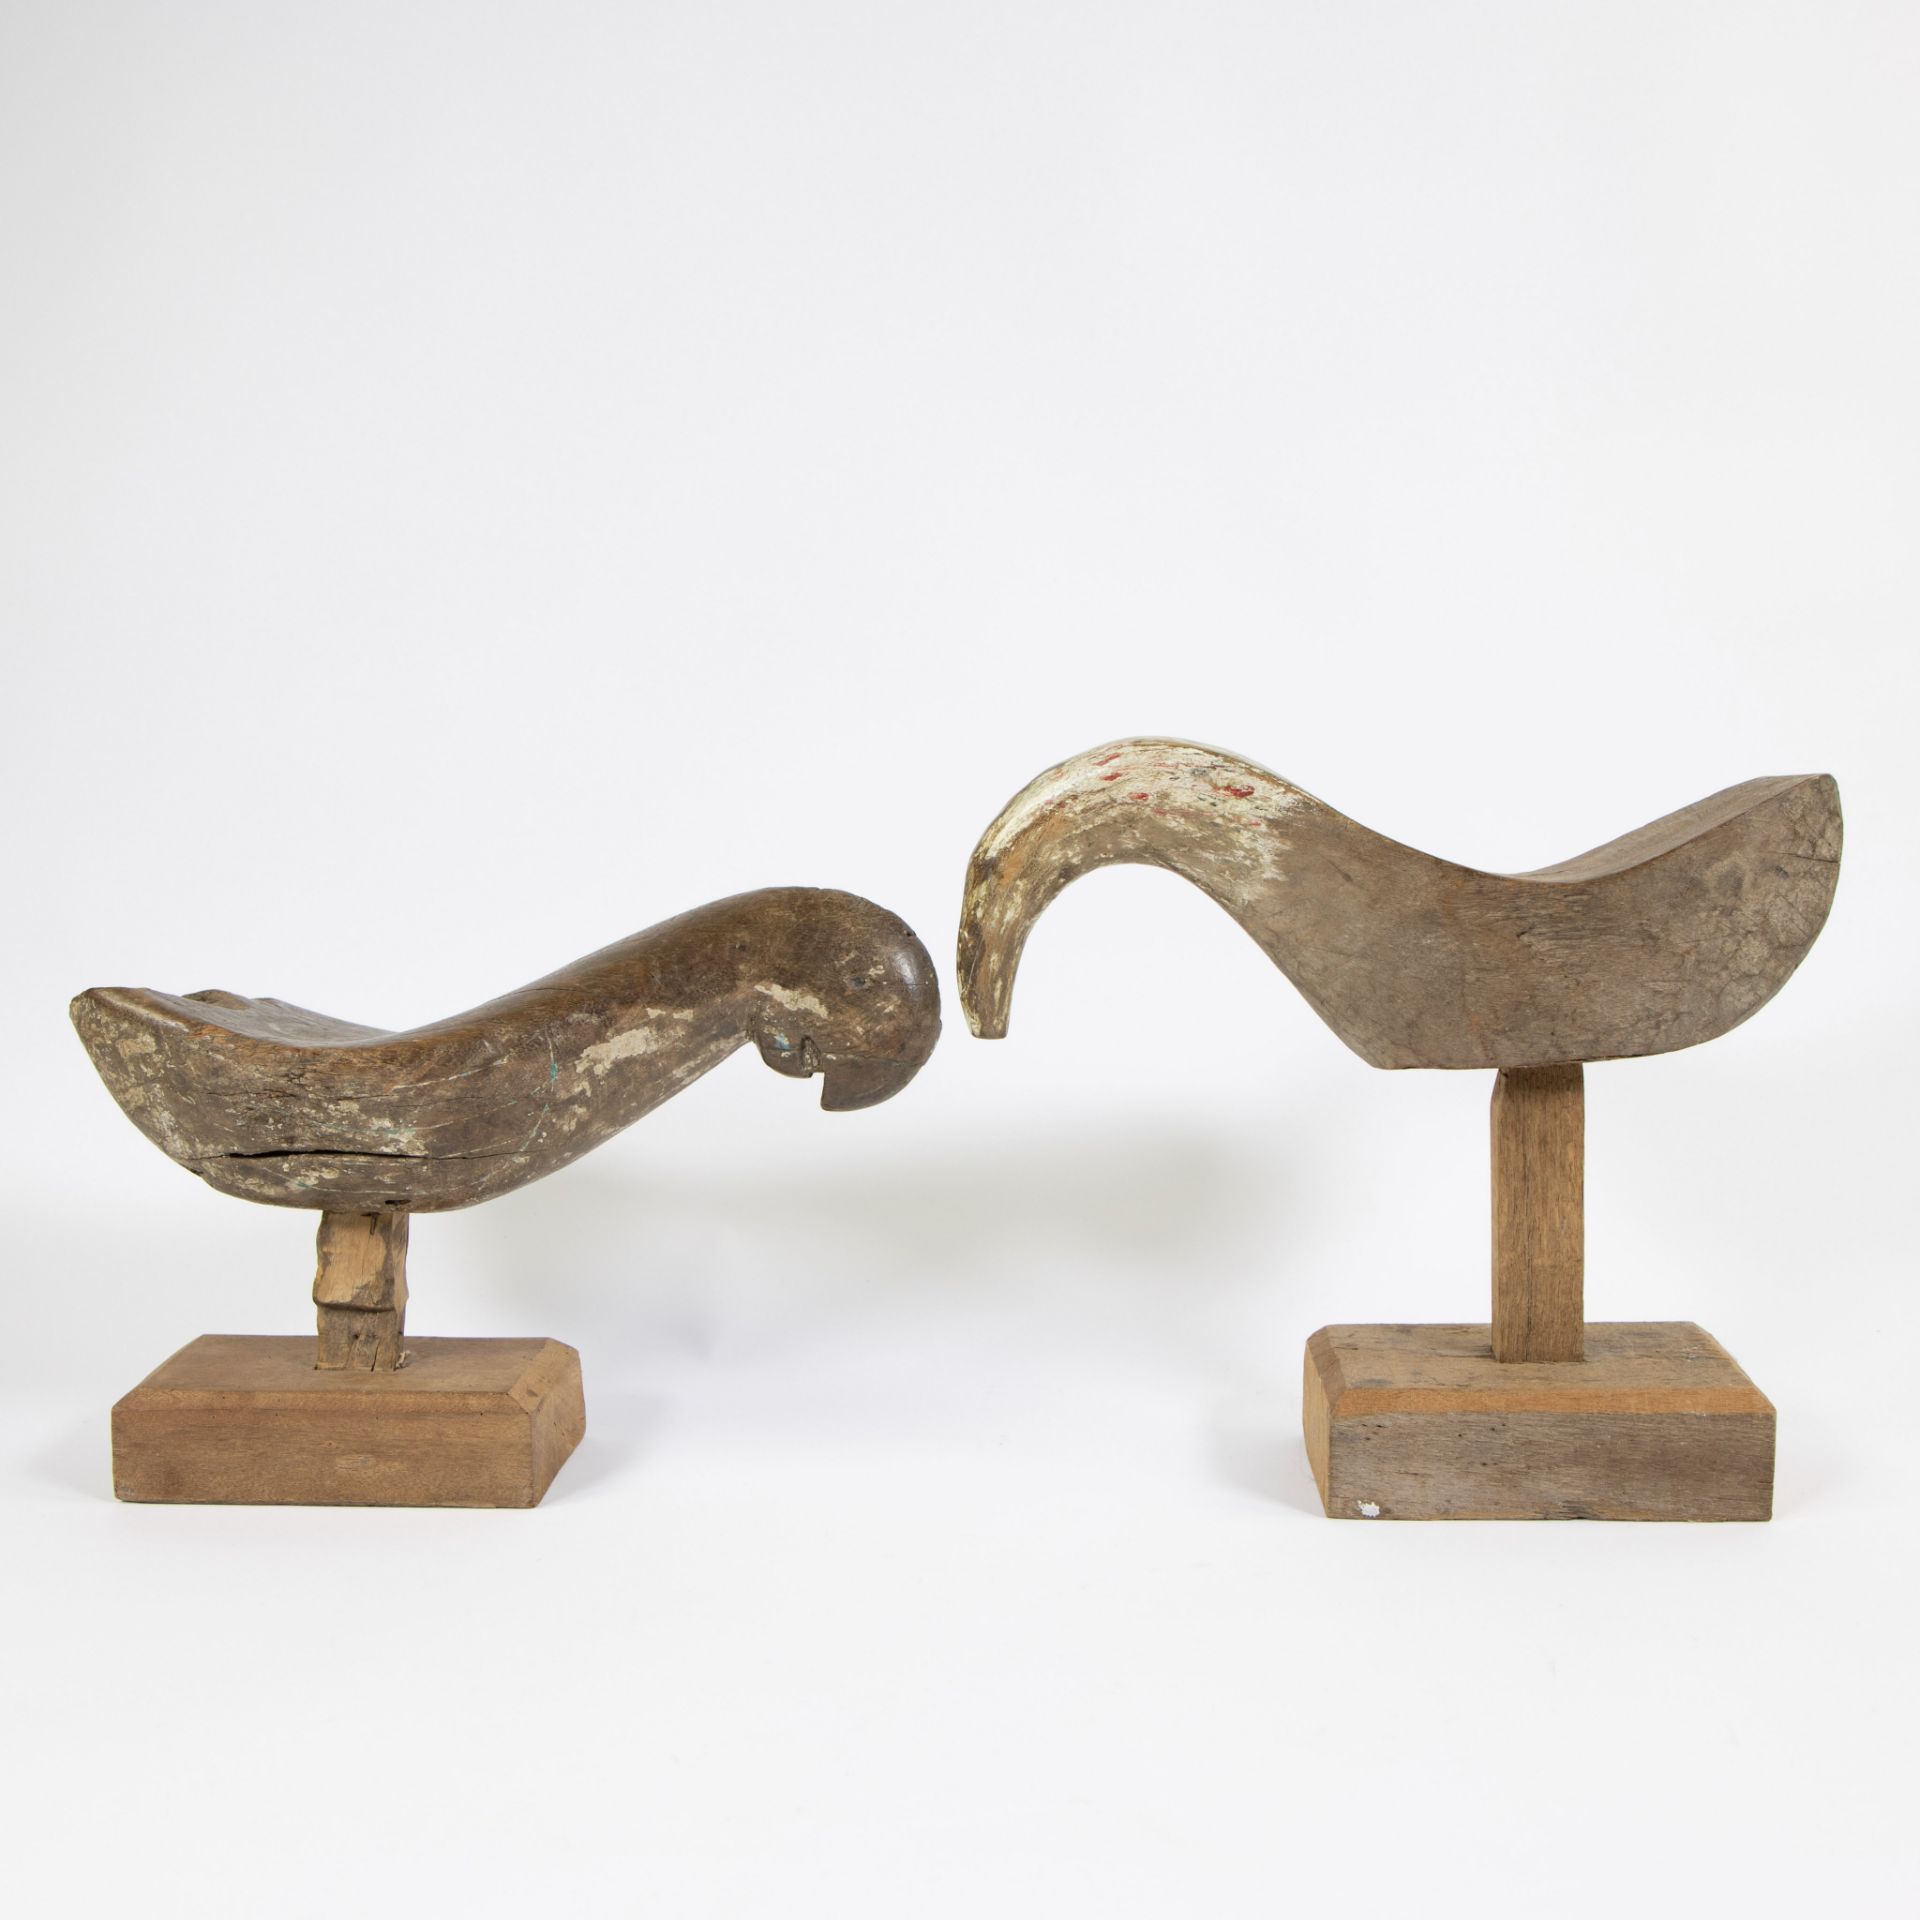 Canoe seats in the shape of chickens with old painting (Indonesia), early 20th century - Image 3 of 4